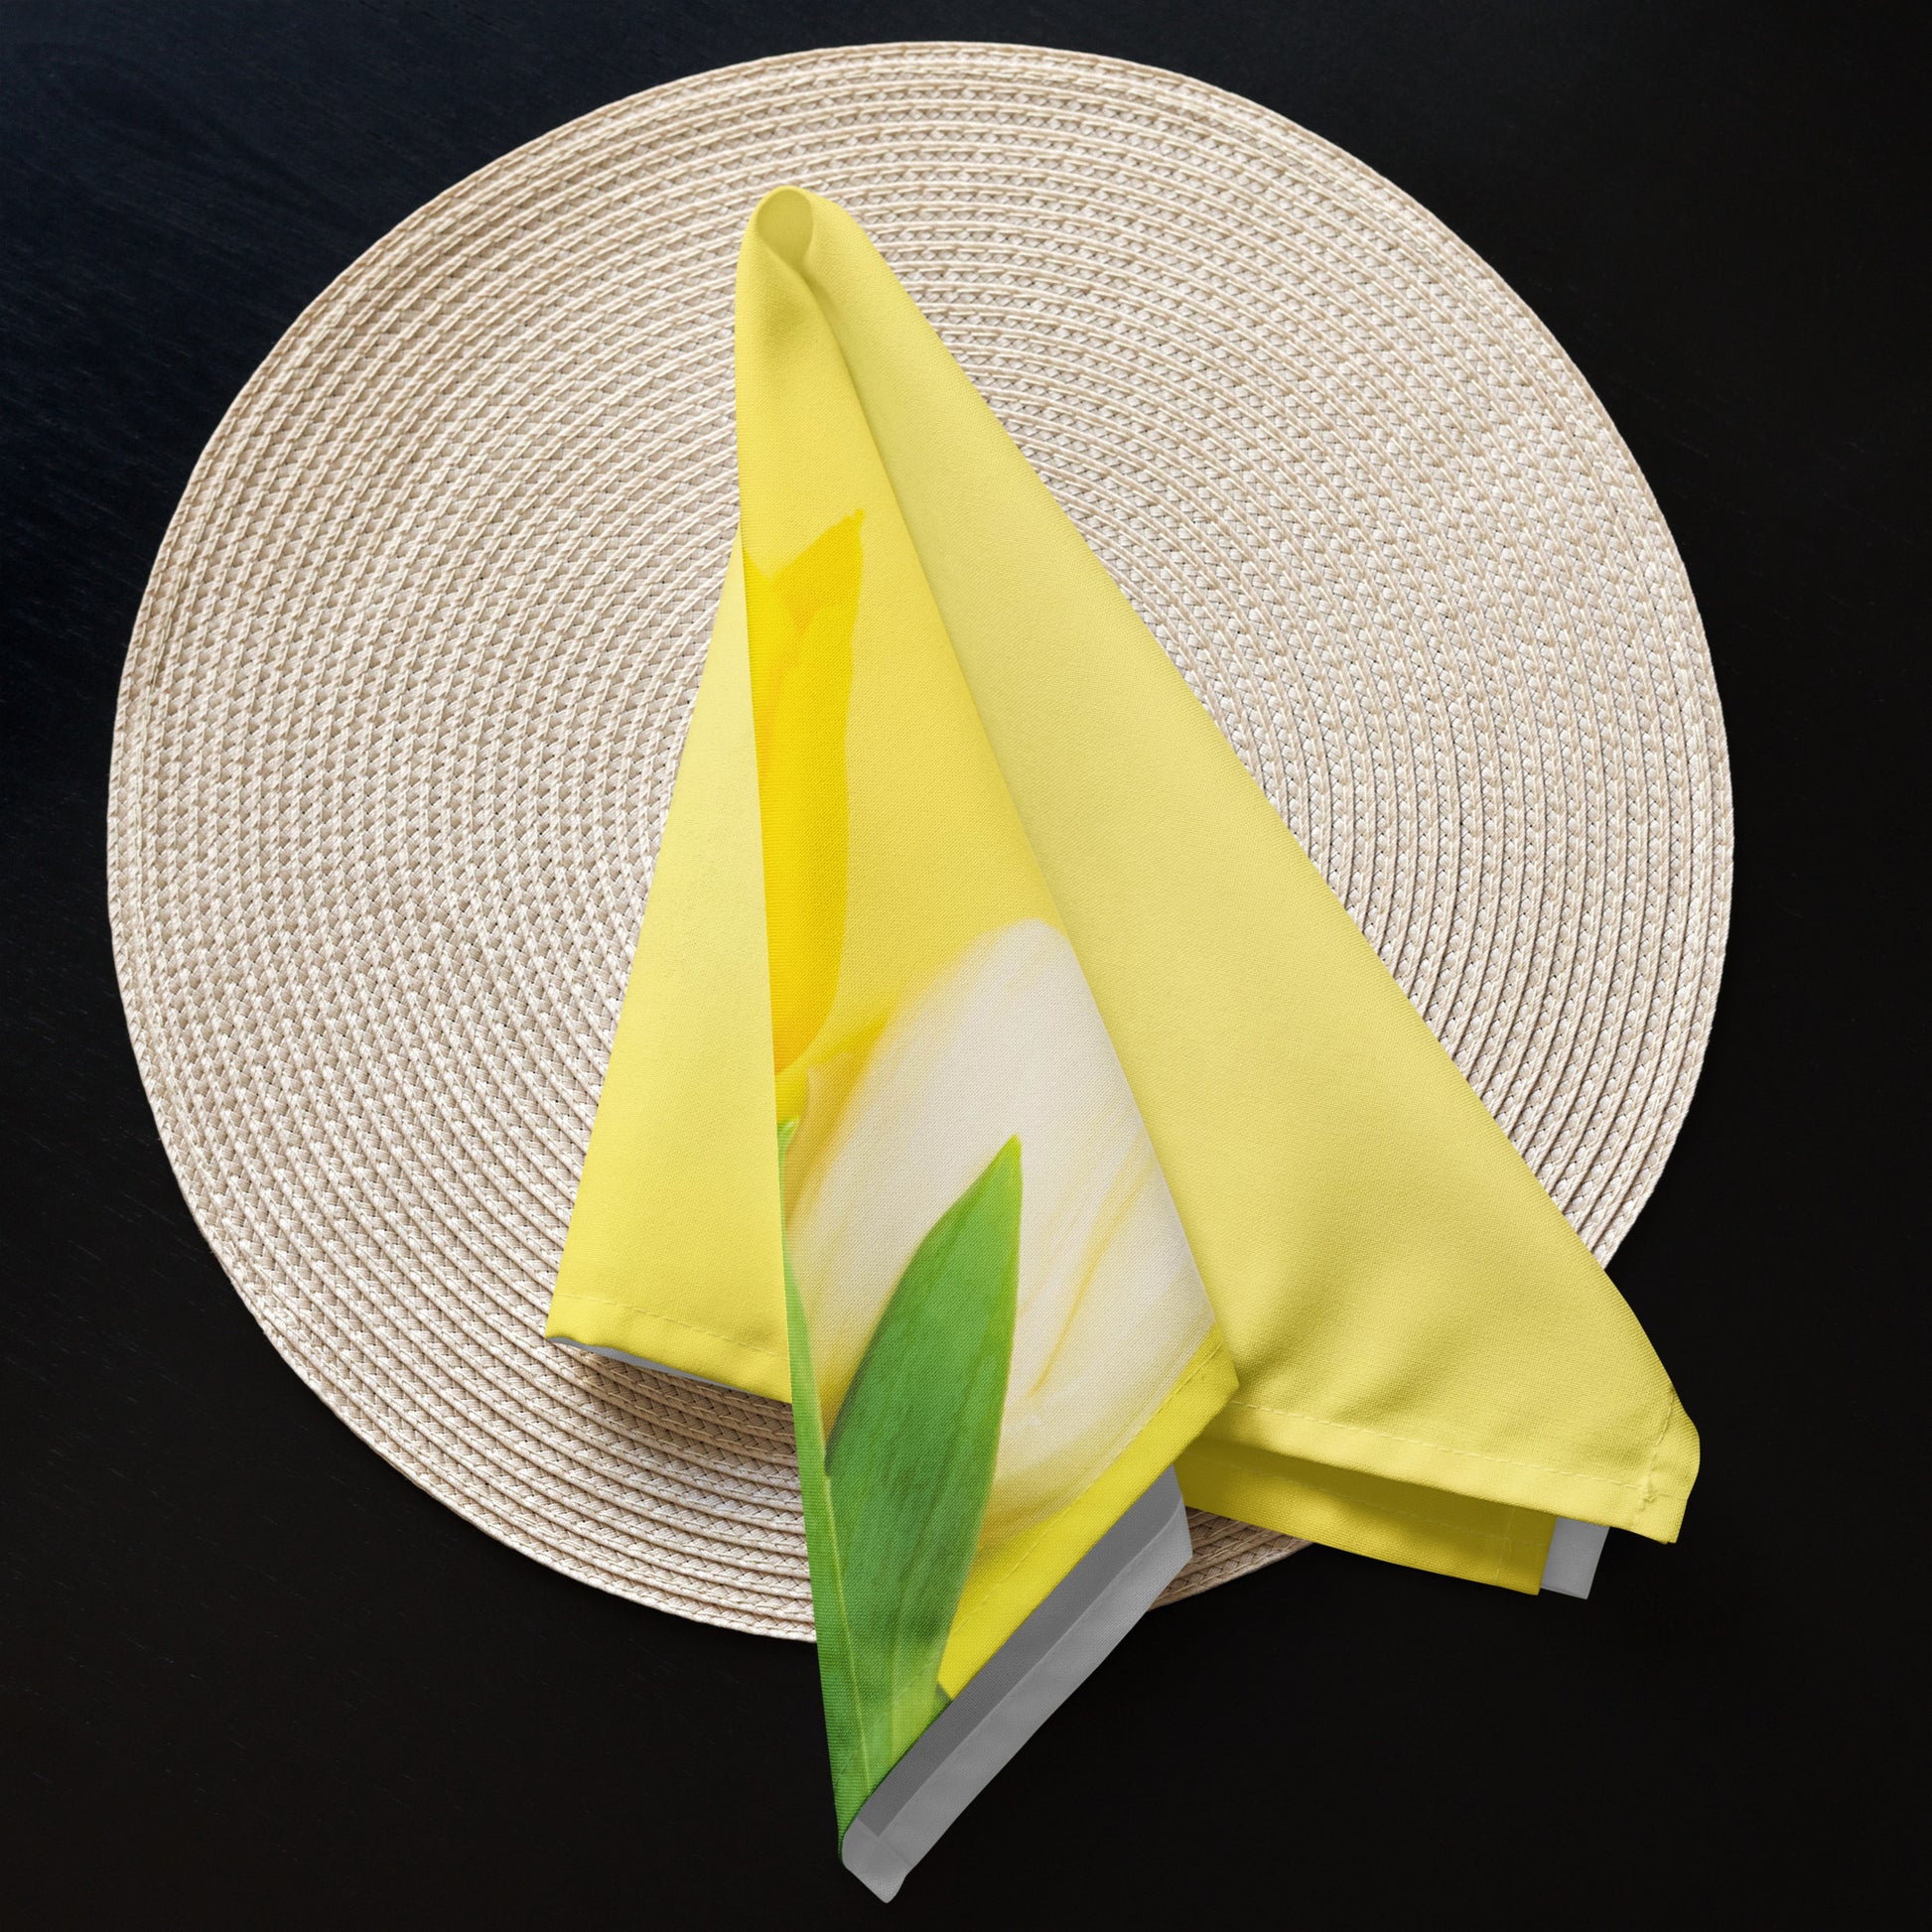 Yellow tulip cloth napkin folded creatively on round placemat.